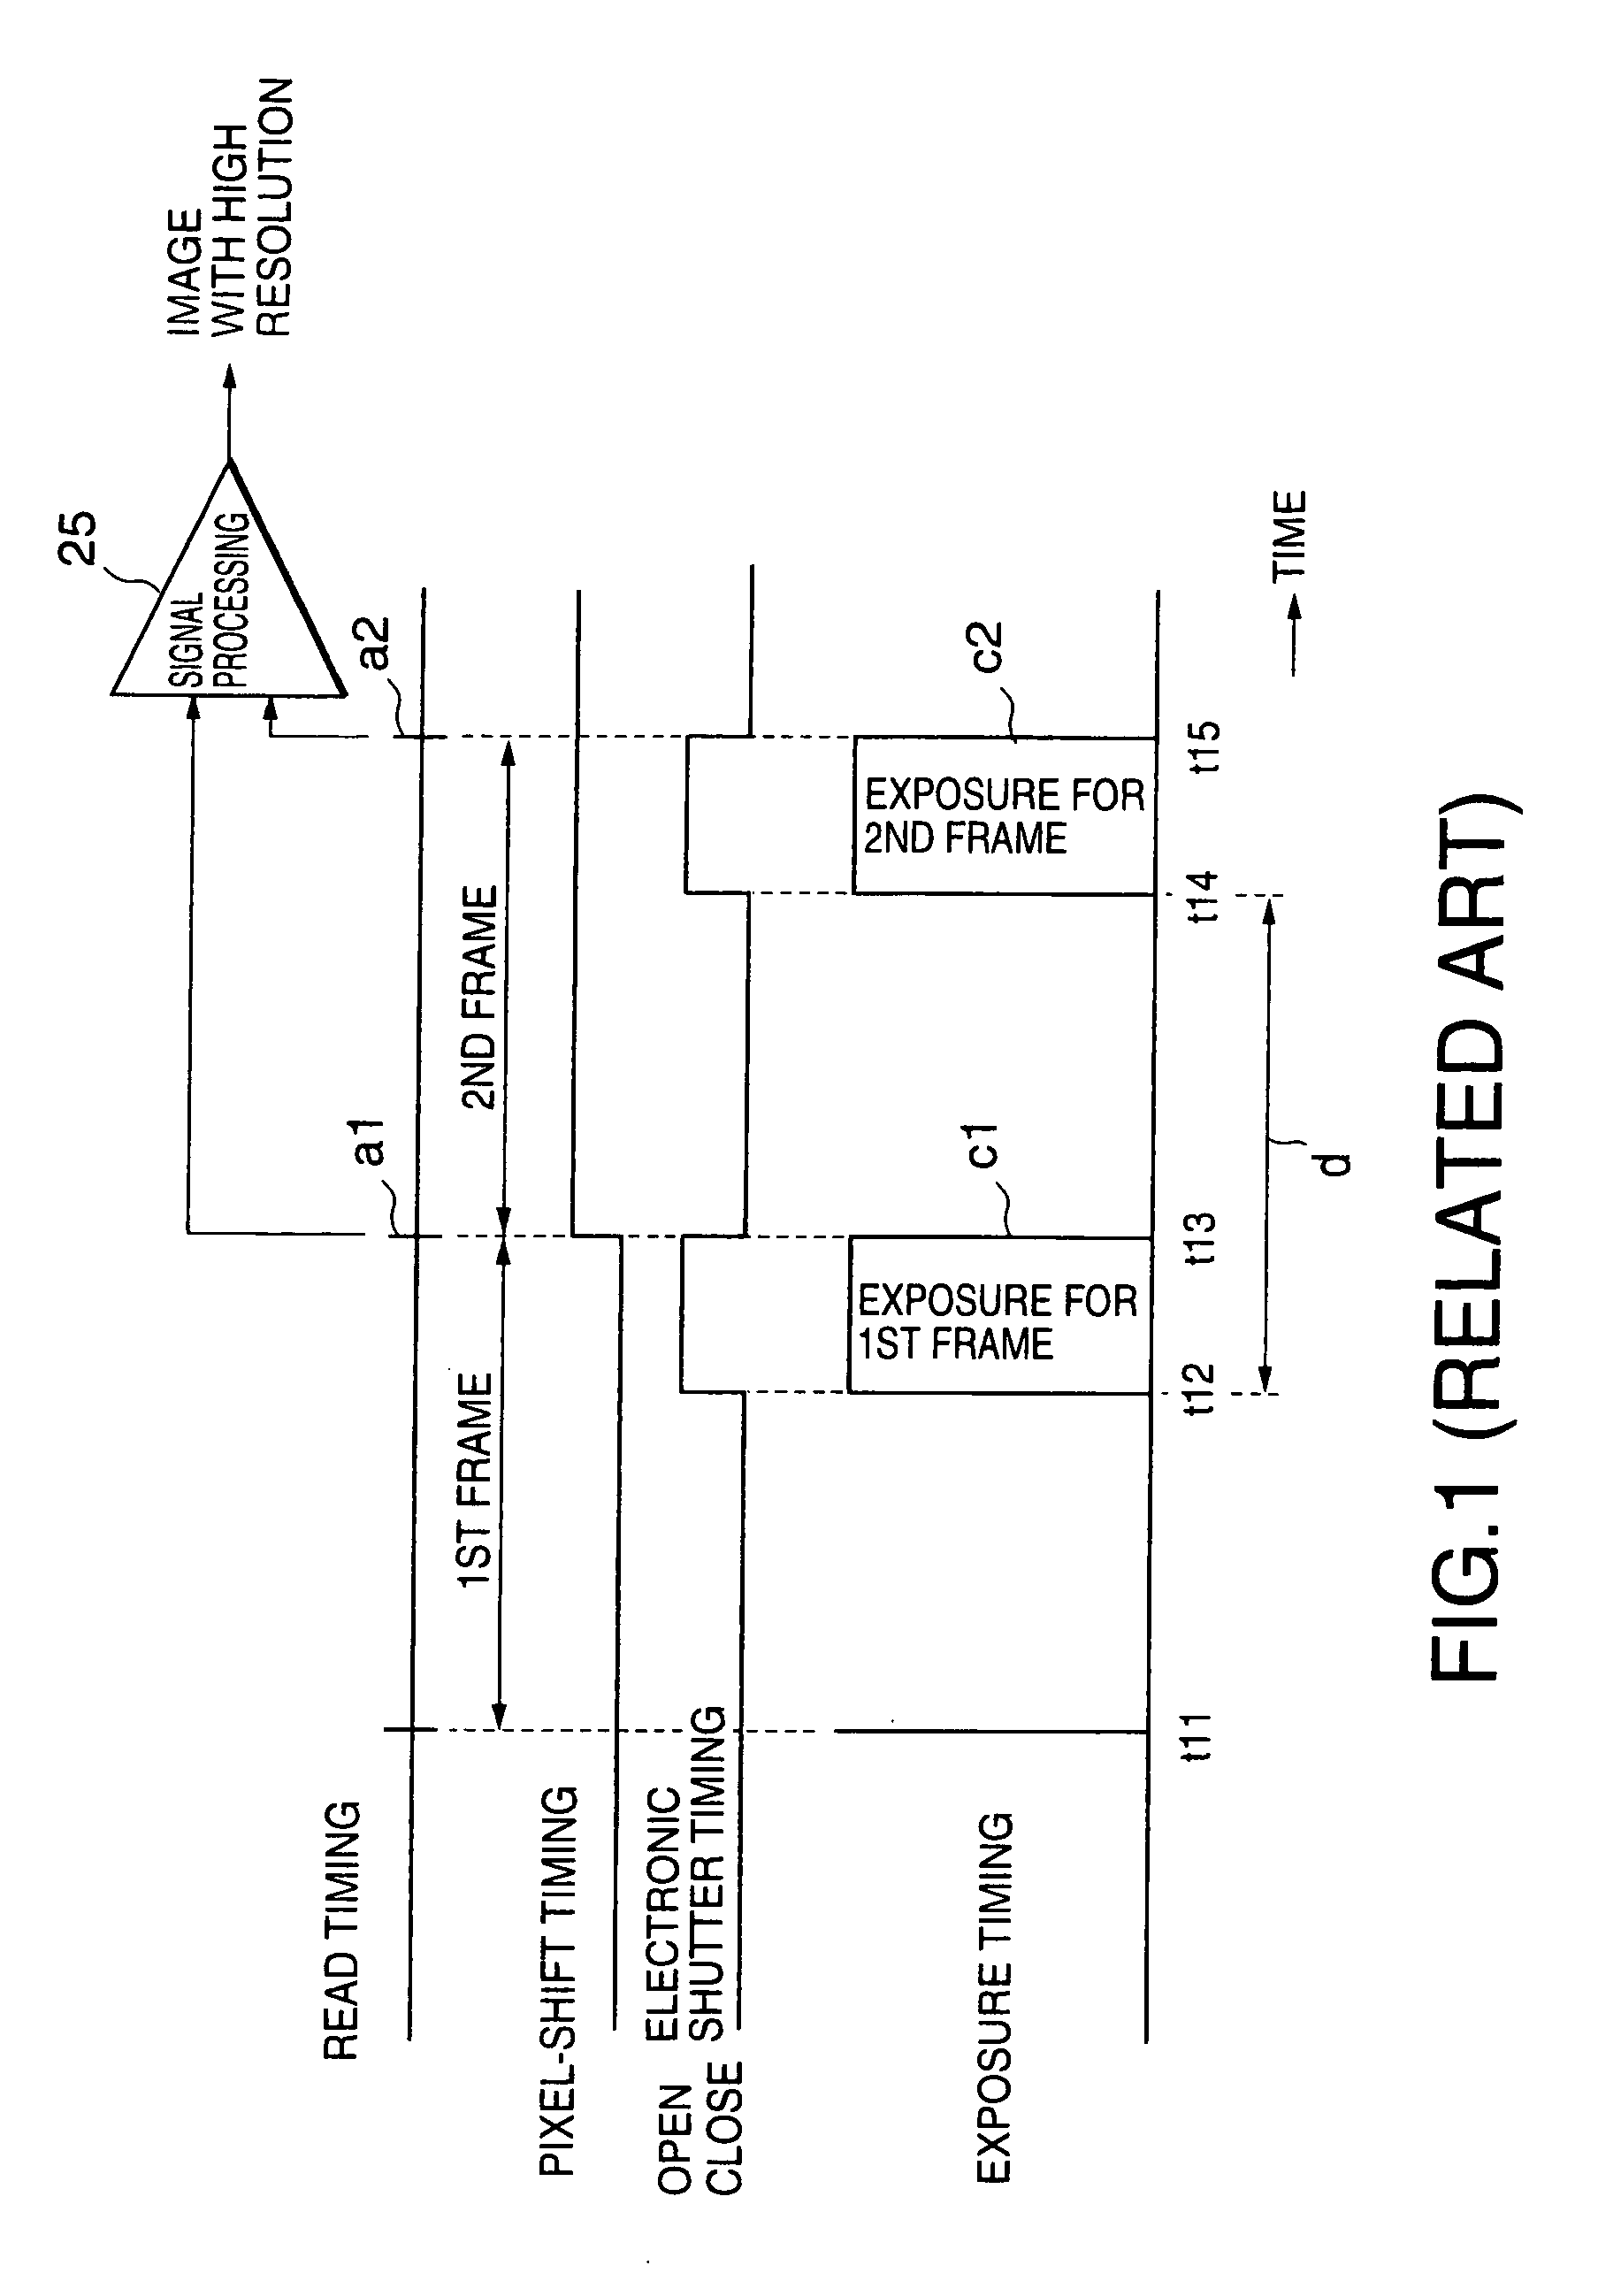 Solid-state image sensing apparatus with a relative positional light shift